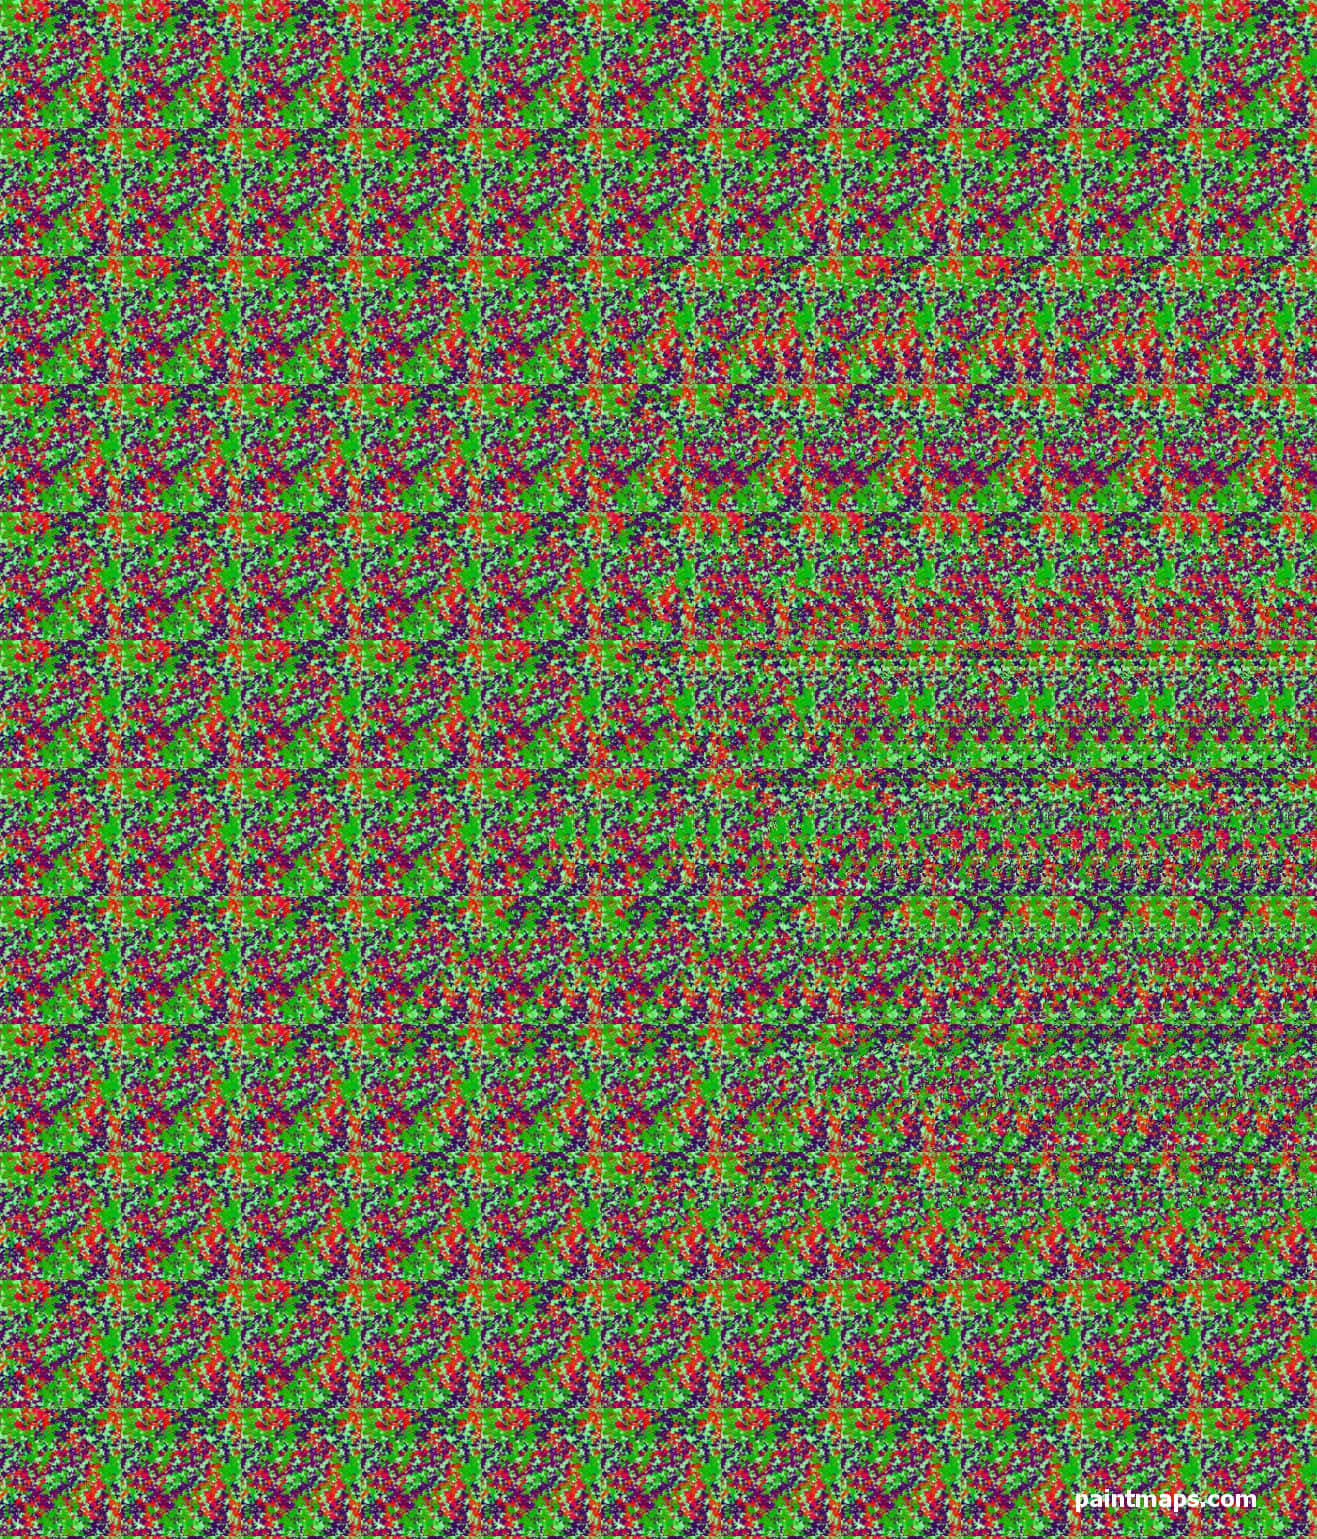 Experience the World of 3D with a Magic Eye Picture